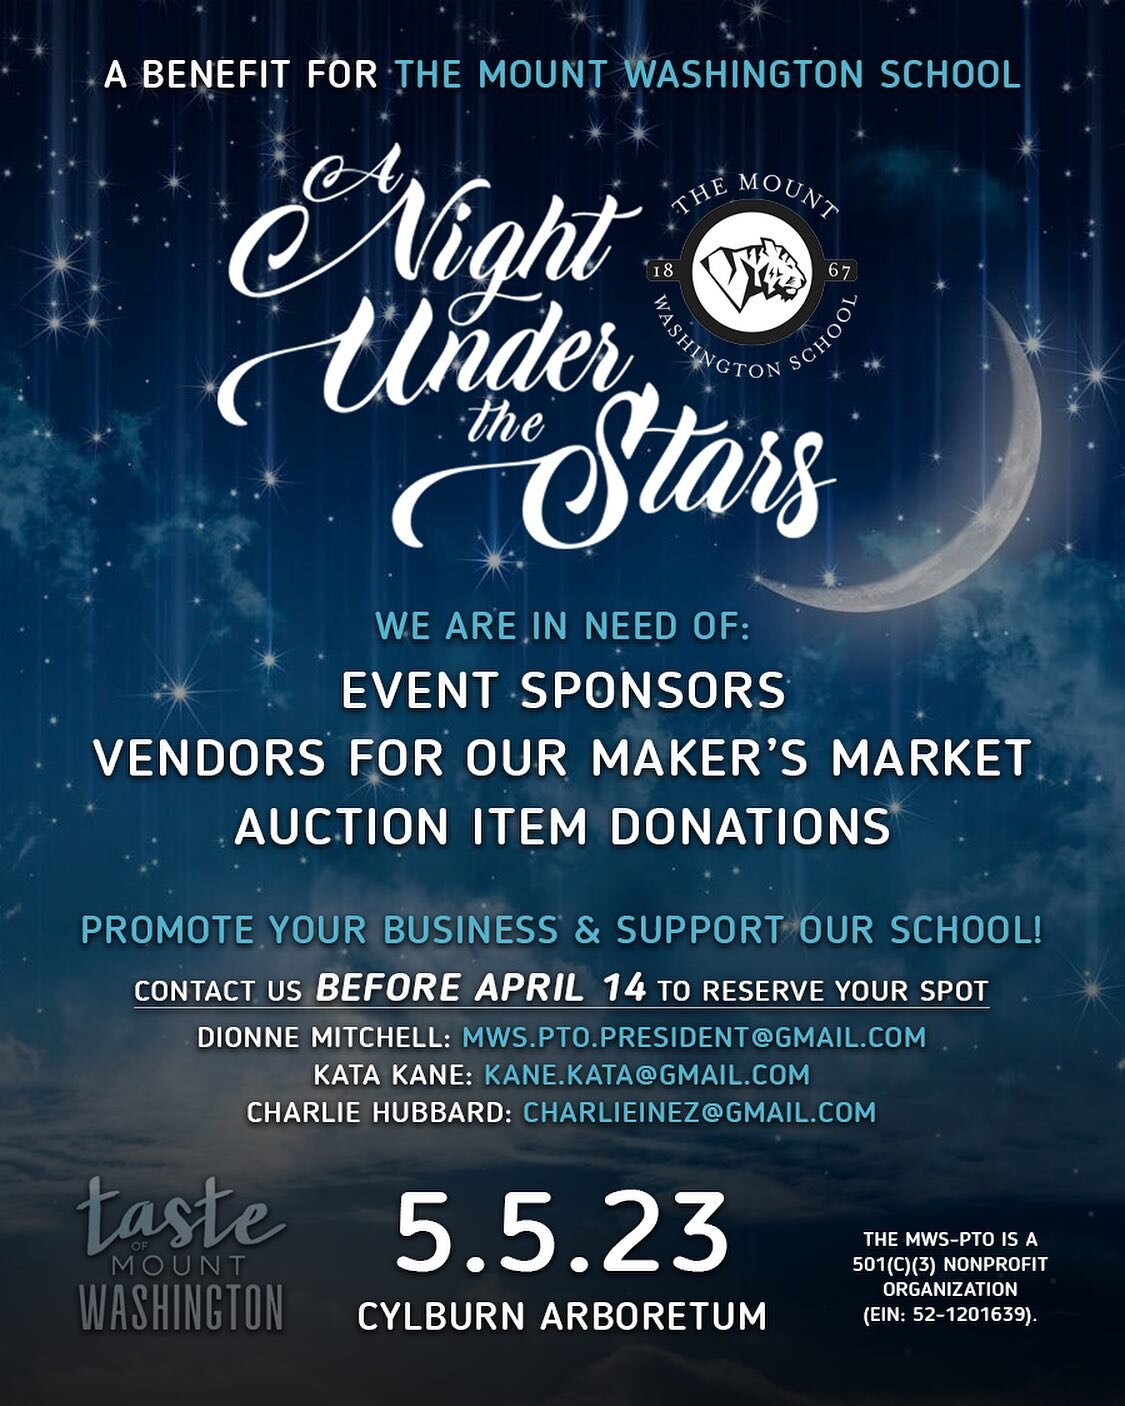 We are in need of 💫SPONSORS, 
🌟VENDORS, and ✨AUCTION ITEM donations to make our event a success!

The MWS-PTO is hopeful and excited for this year's event; we anticipate that we will not only raise much needed funds for our scholars and teachers, b